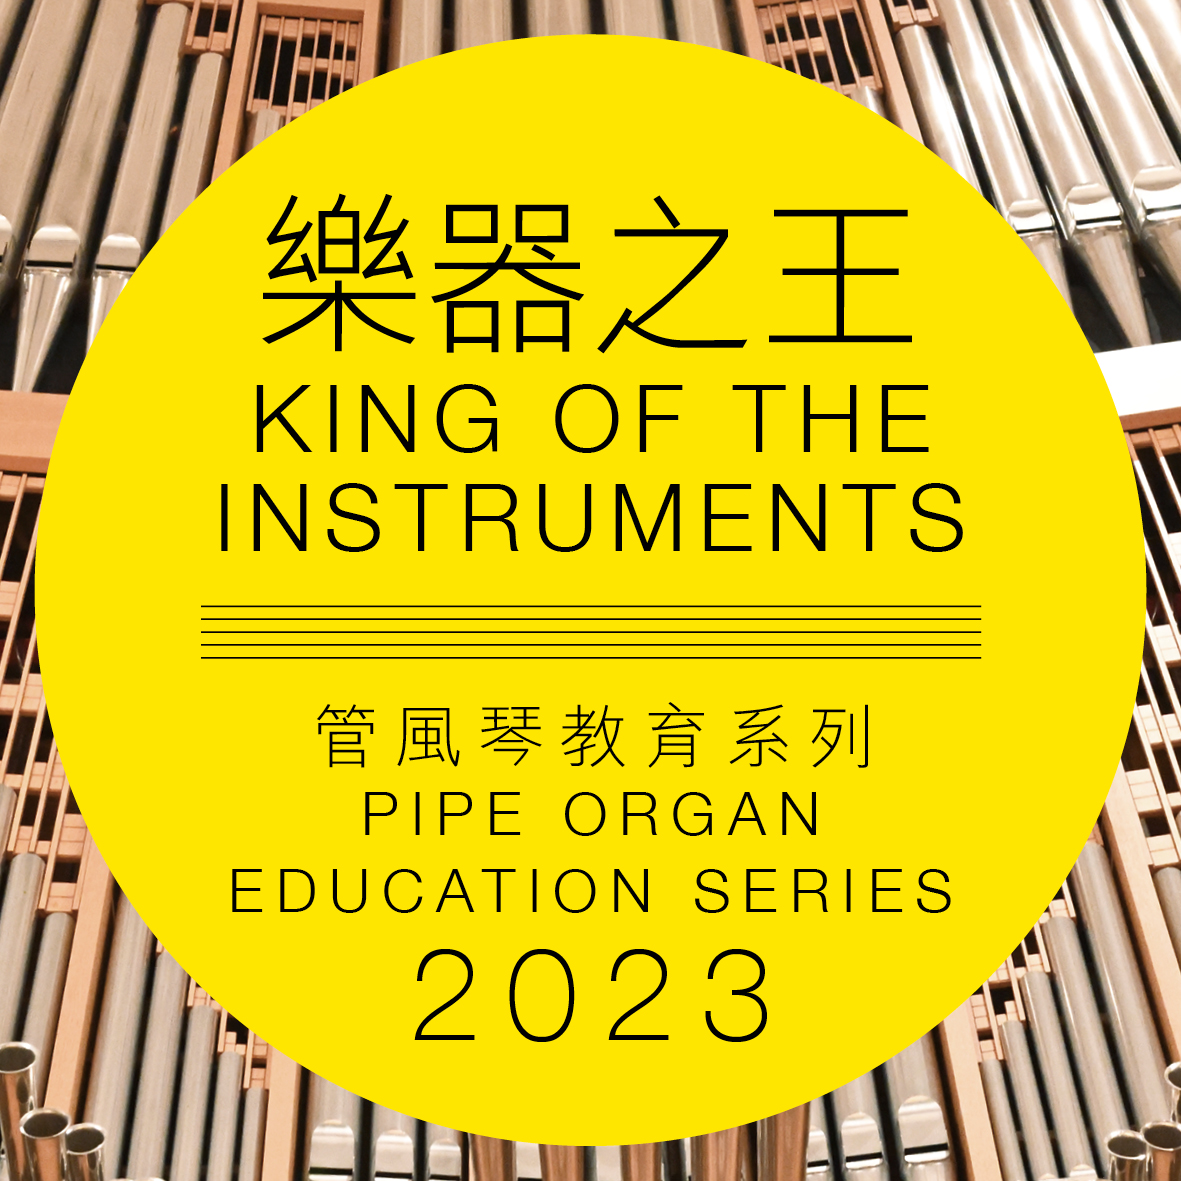 HKCC King of the Instruments Pipe Organ Education Series 2023